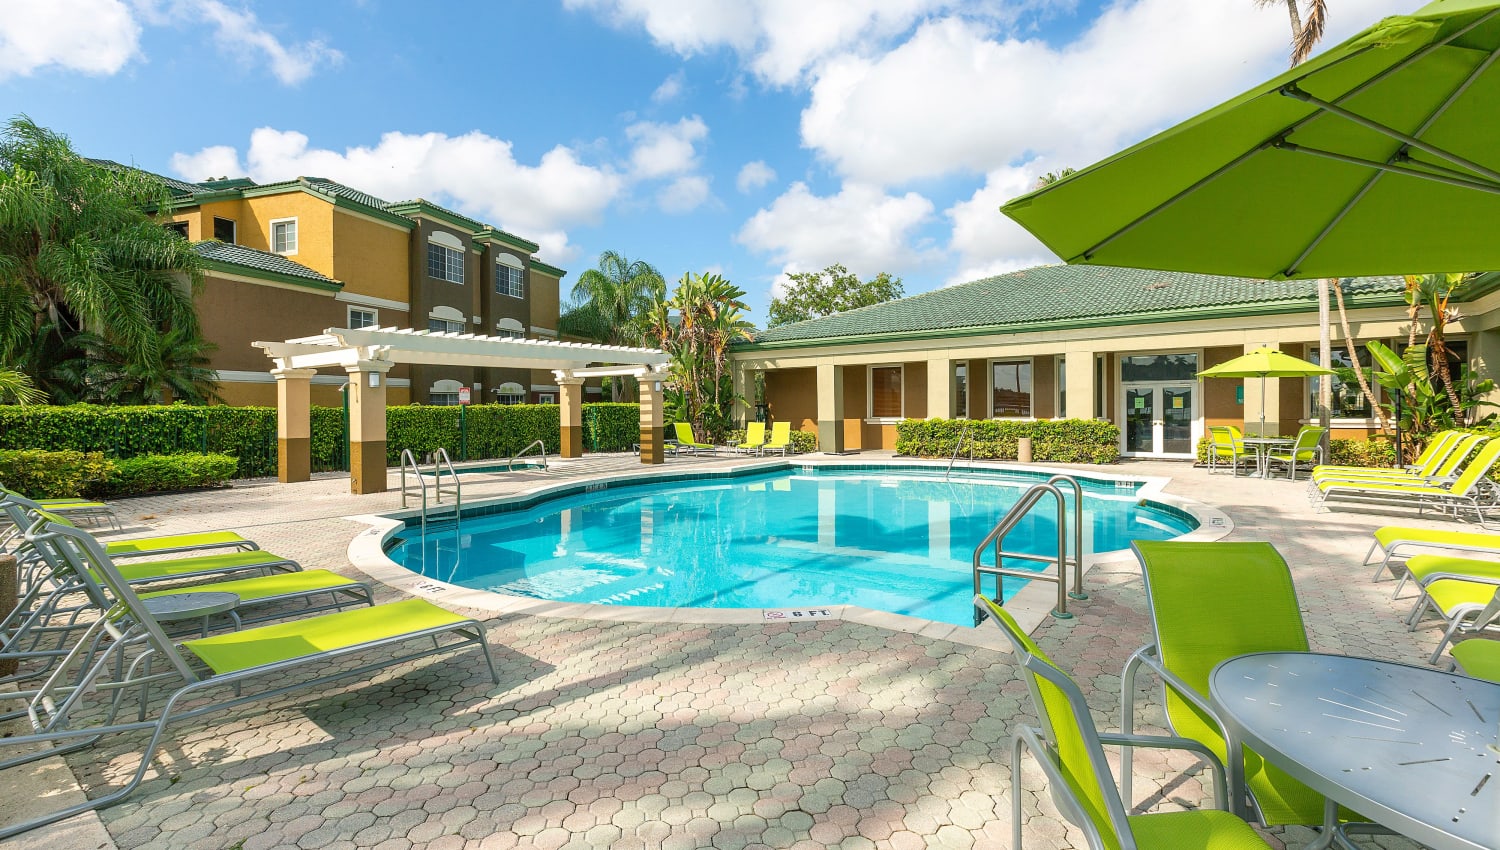 Sparkling pool at Club Lake Pointe Apartments in Coral Springs, Florida